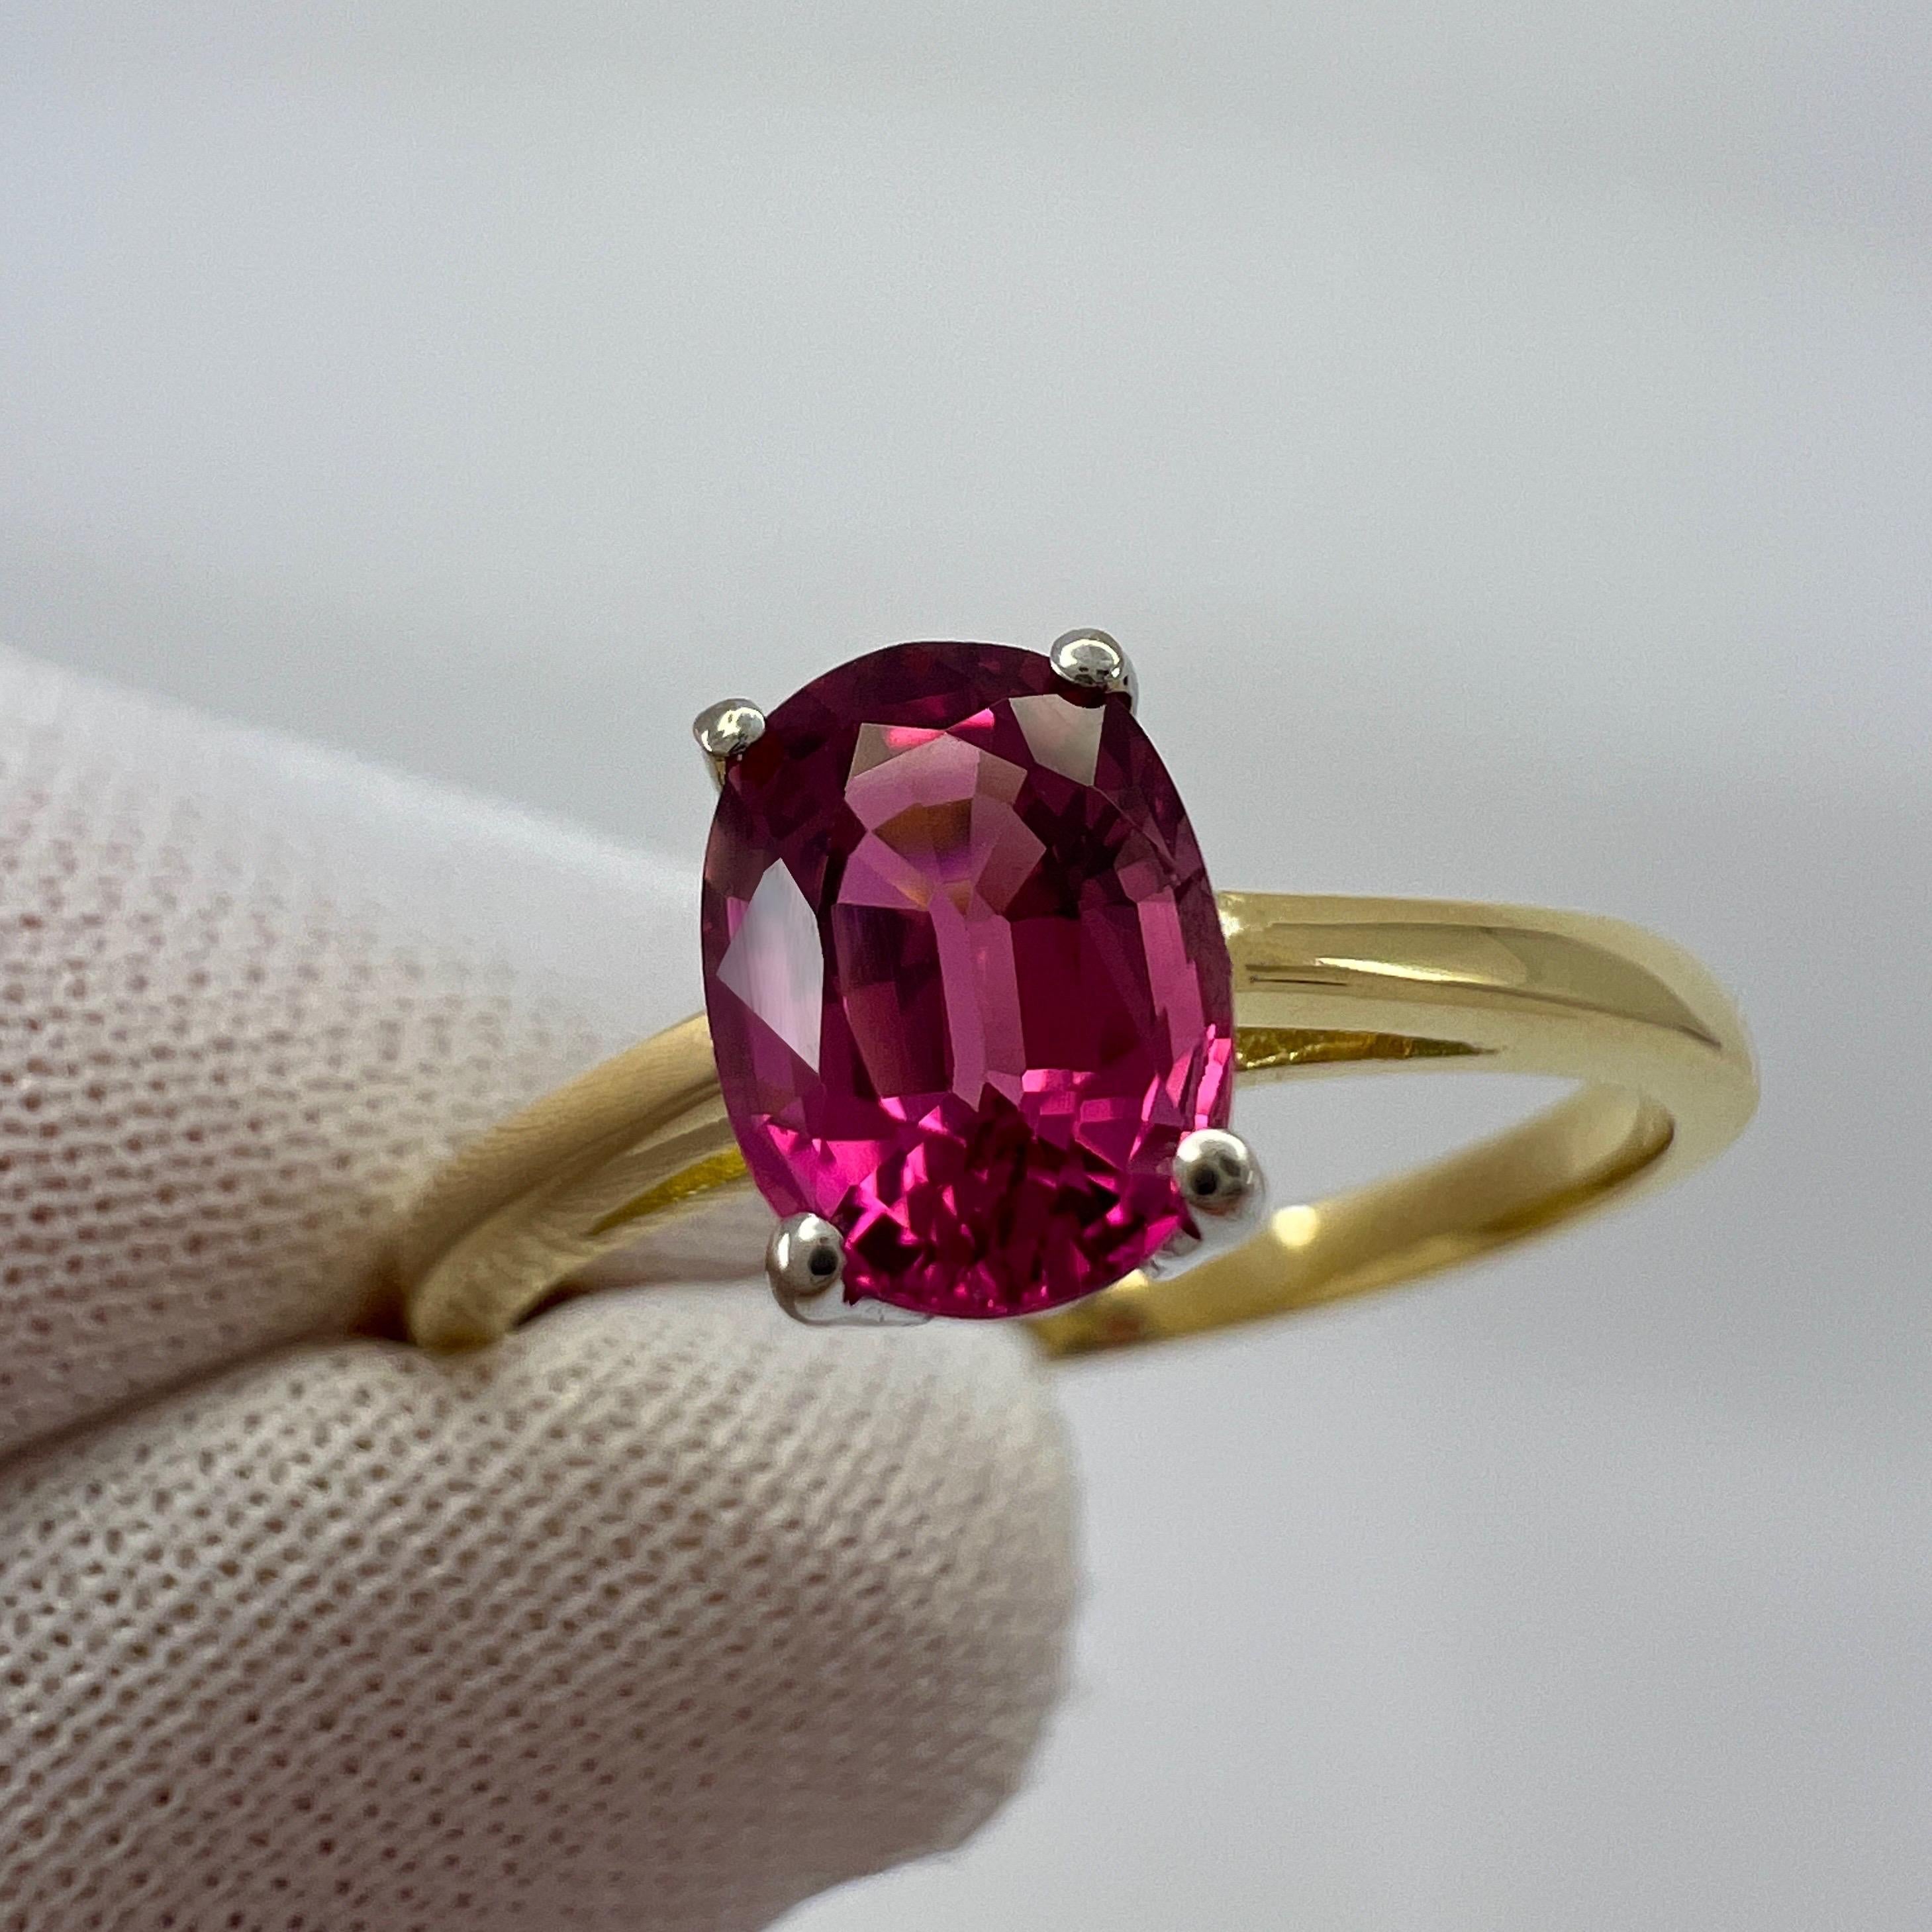 1.10ct Vivid Pink Purple Rubellite Tourmaline Oval Cut 18k Gold Solitaire Ring For Sale 1